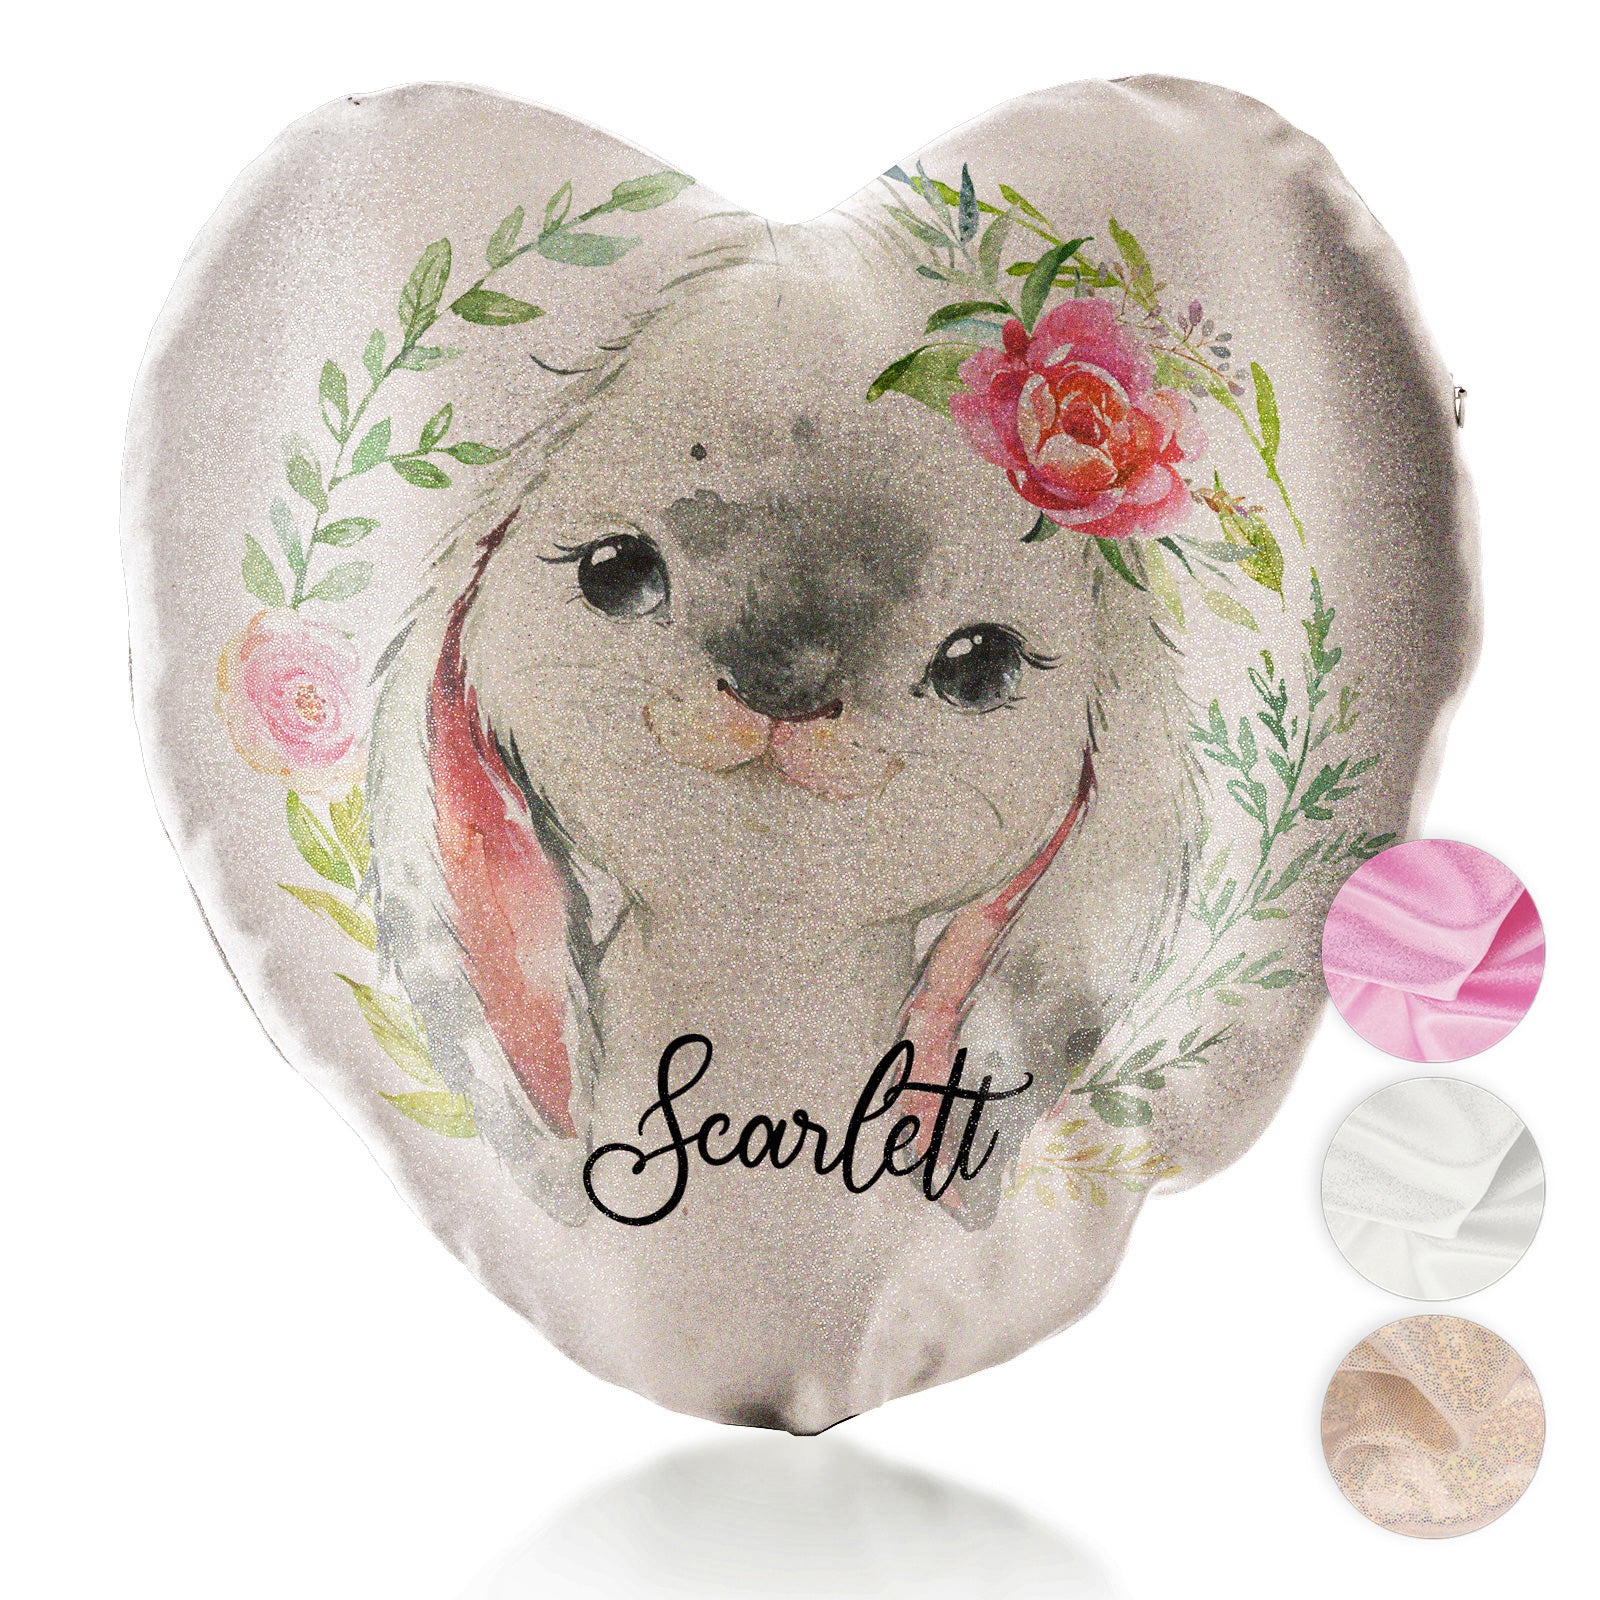 Personalised Glitter Heart Cushion with Grey Rabbit Flower Wreath and Cute Text